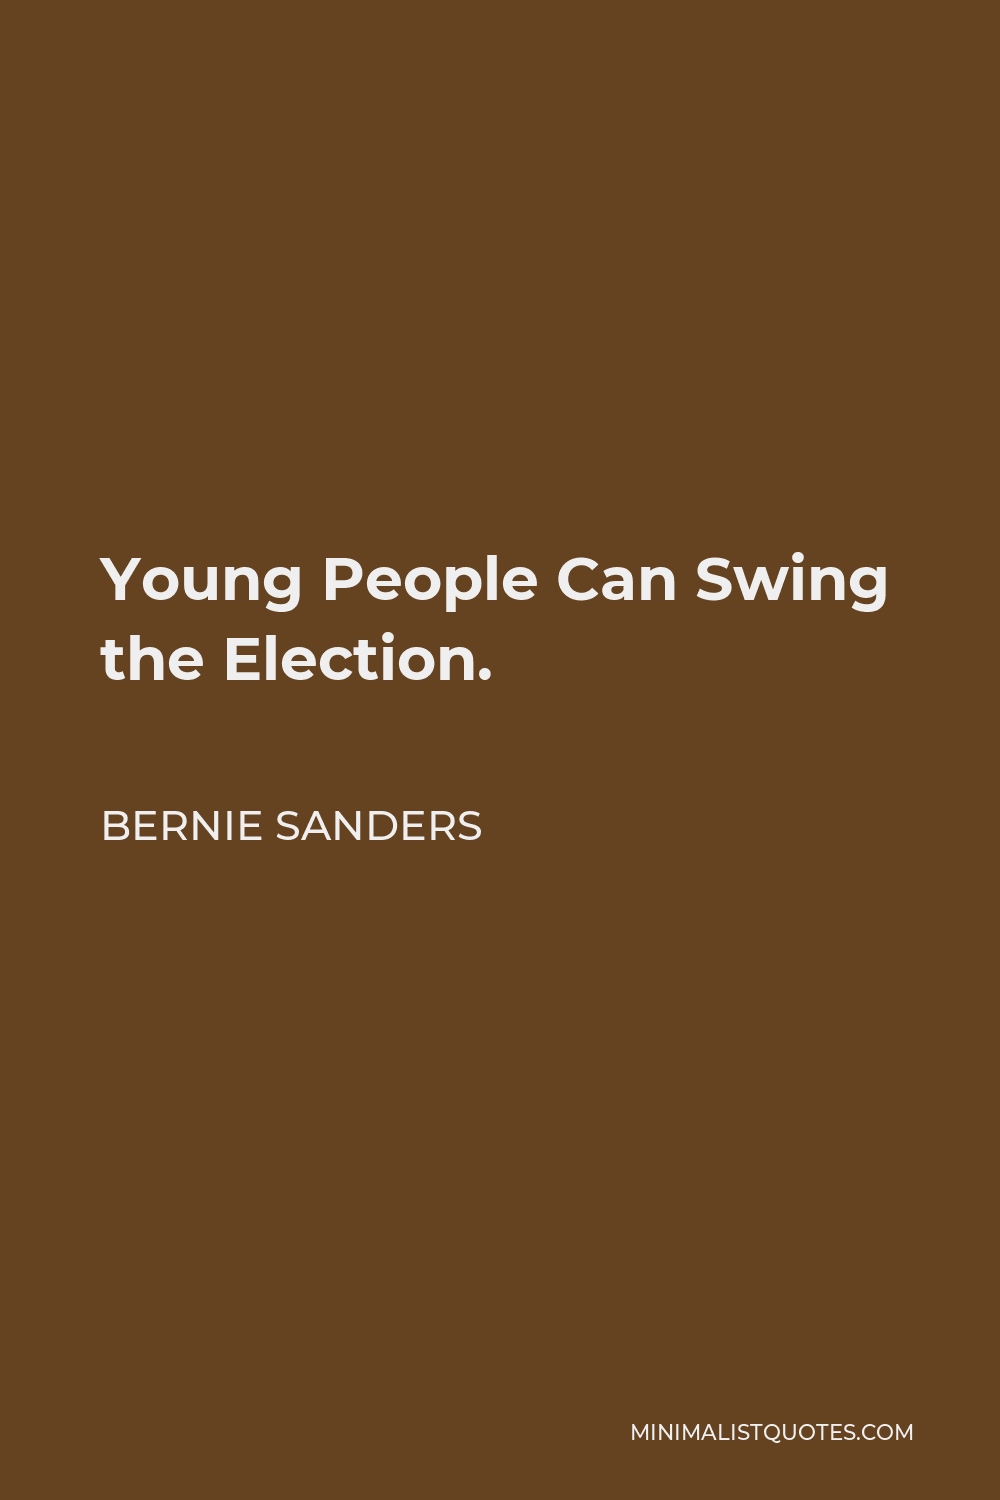 Bernie Sanders Quote - Young People Can Swing the Election.